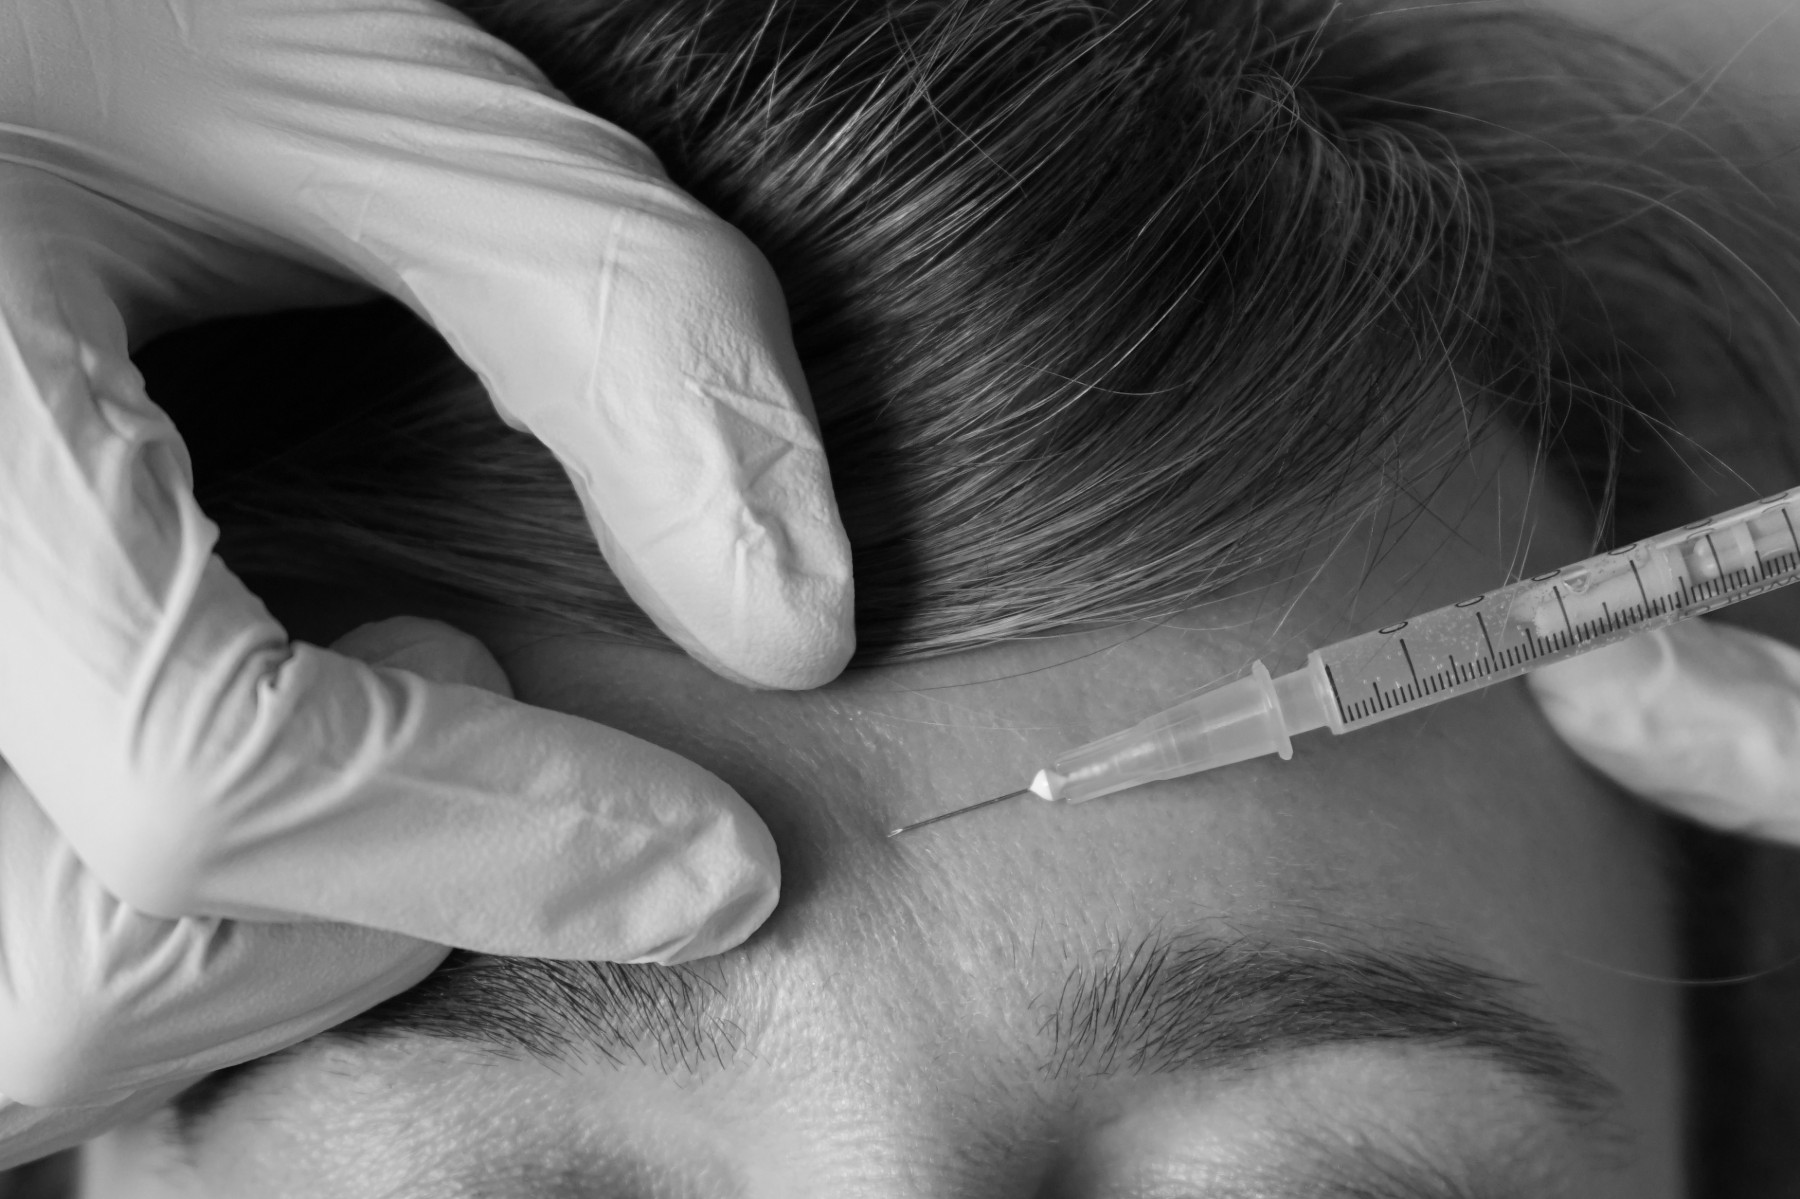 needle injecting cosmetic injection into a woman's forehead at a med spa